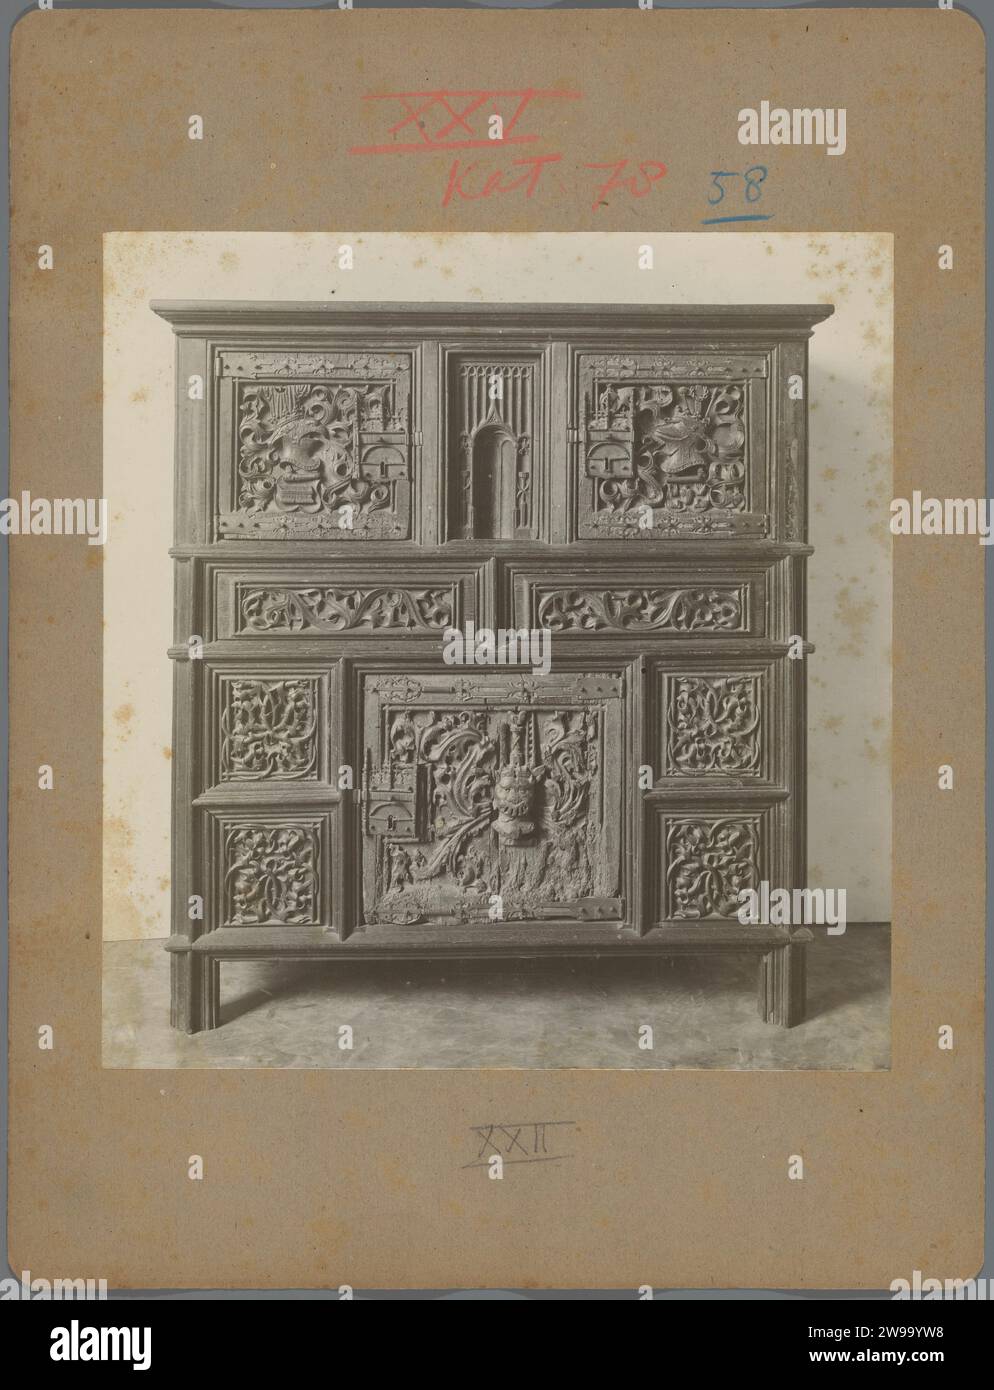 Cupboard with cut ornaments of plant motifs, animal heads and satan, c. 1875 - c. 1900 photograph  Europe cardboard. photographic support gelatin silver print cupboard. devil(s) and demons: Satan. ornament derived from plant forms. ornament  hybrid animals Europe Stock Photo